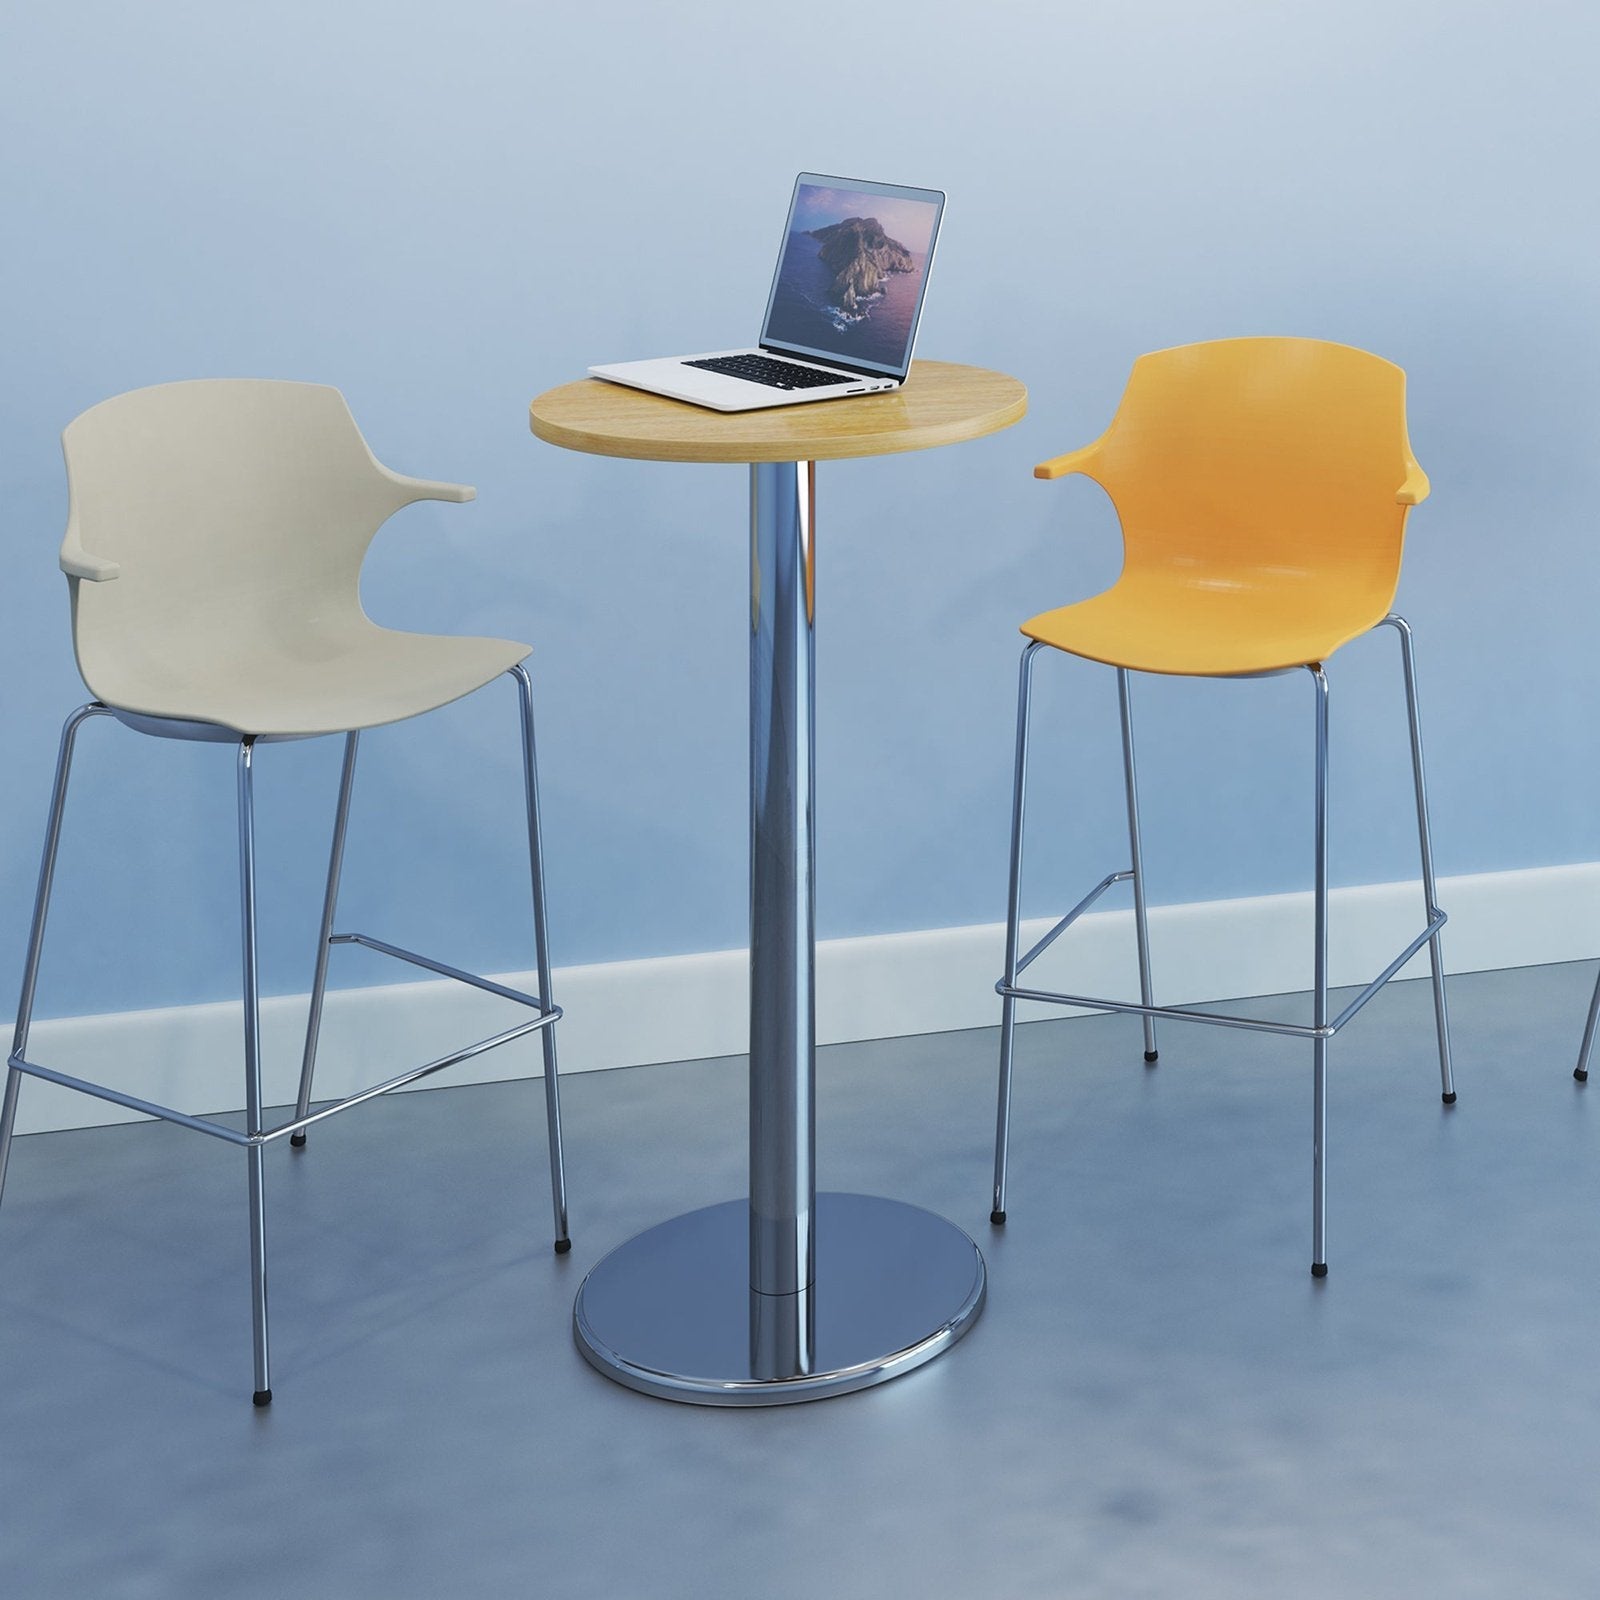 Pisa rectangular poseur table with round chrome bases - Office Products Online